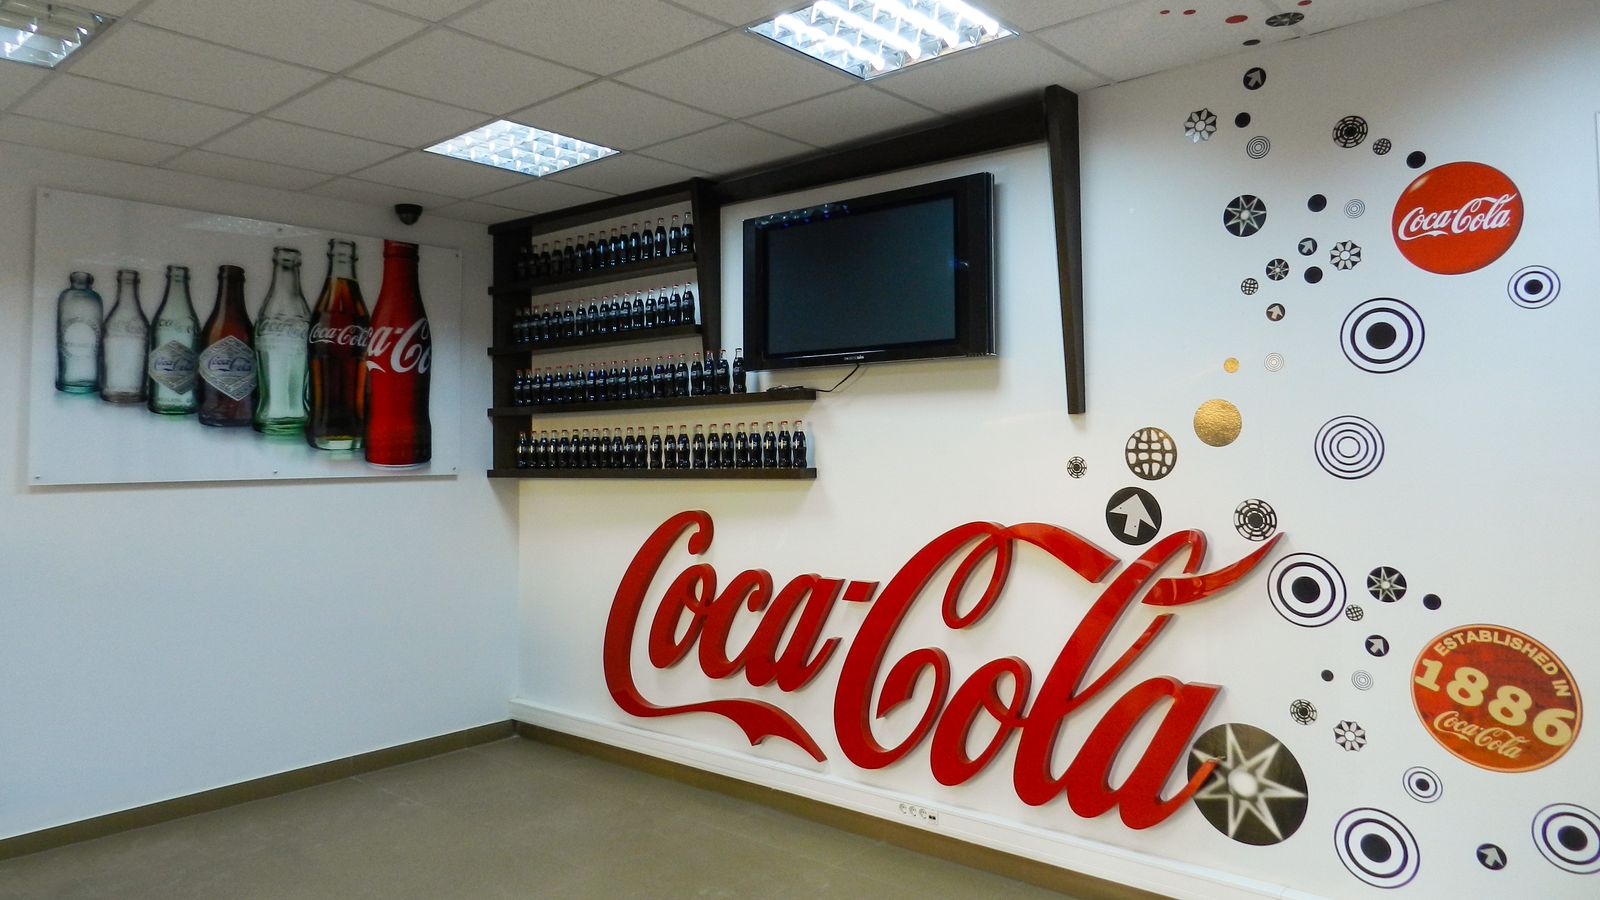 Coca Cola custom interior wall sign with decorative stickers made of acrylic and opaque vinyl